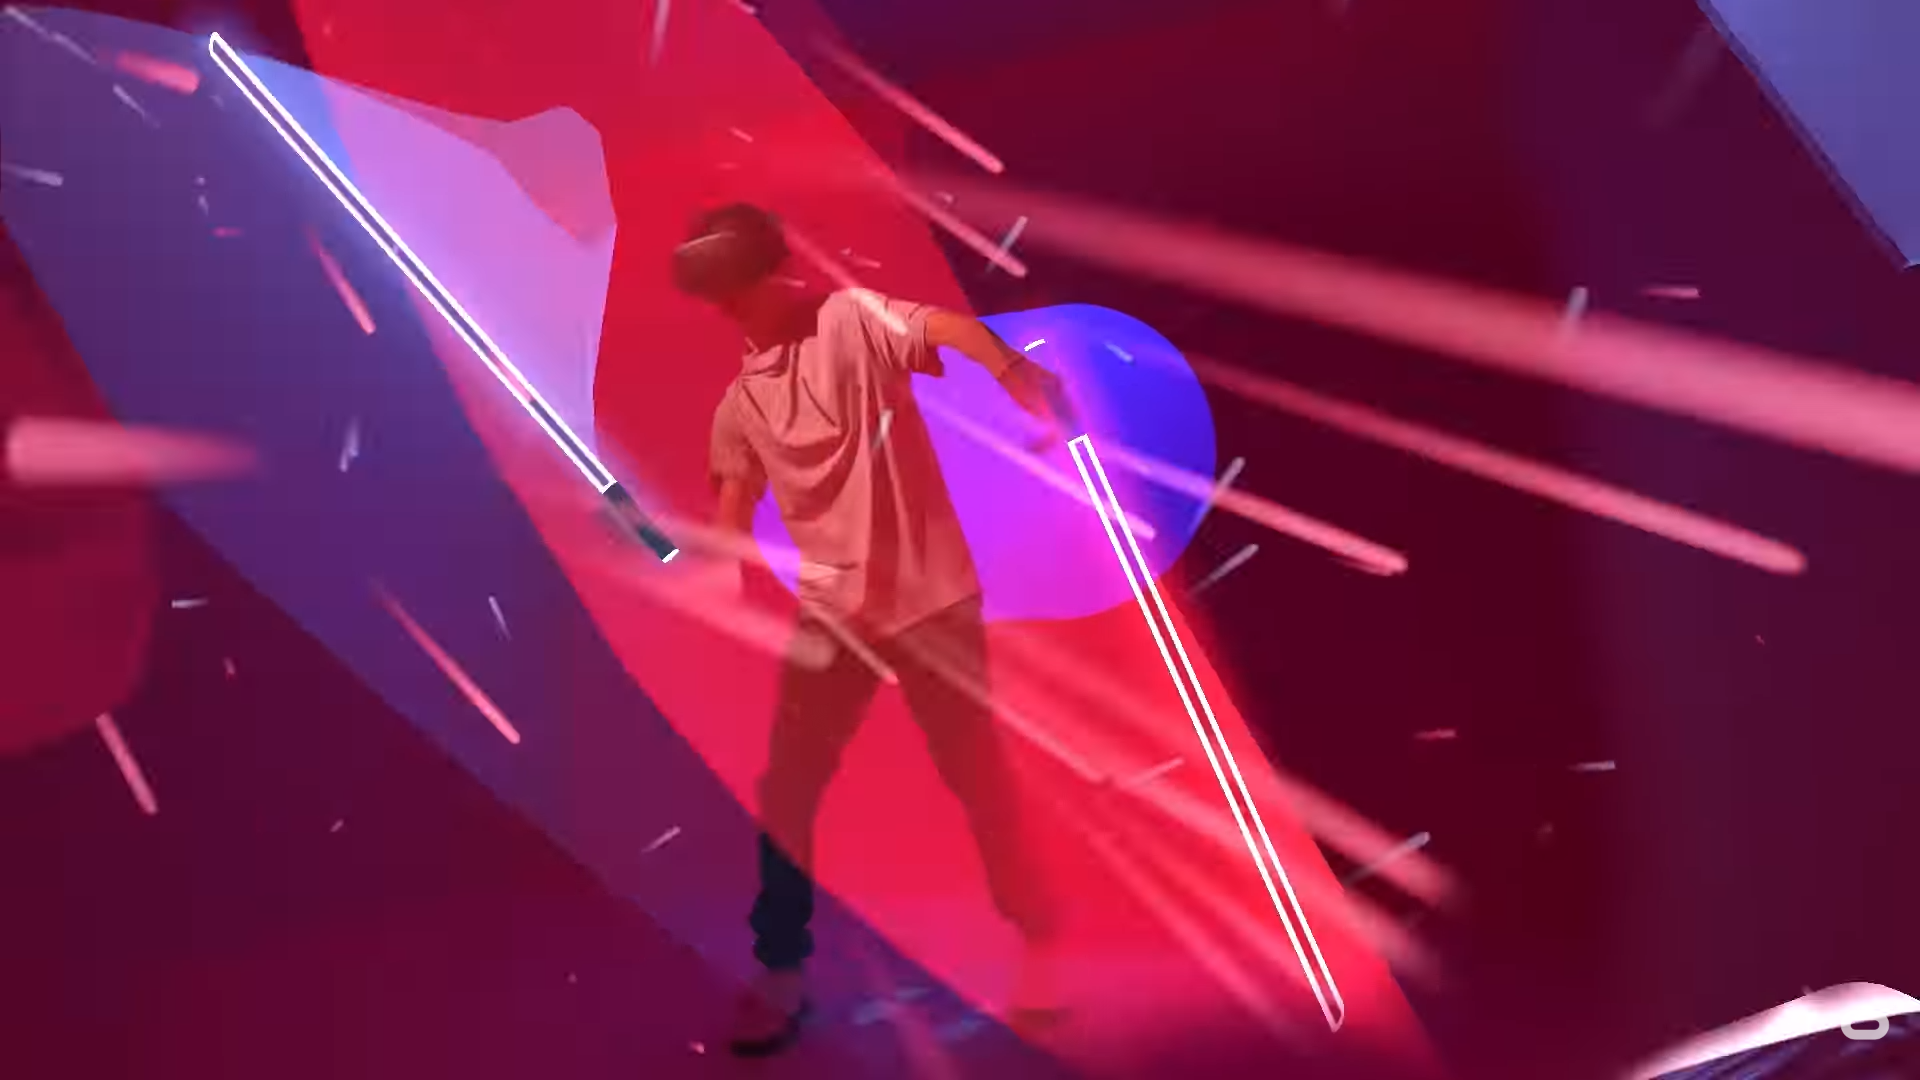 Oculus Quest S Powerful Portable Vr As Proven By The Fun Of Beat Saber Ars Technica